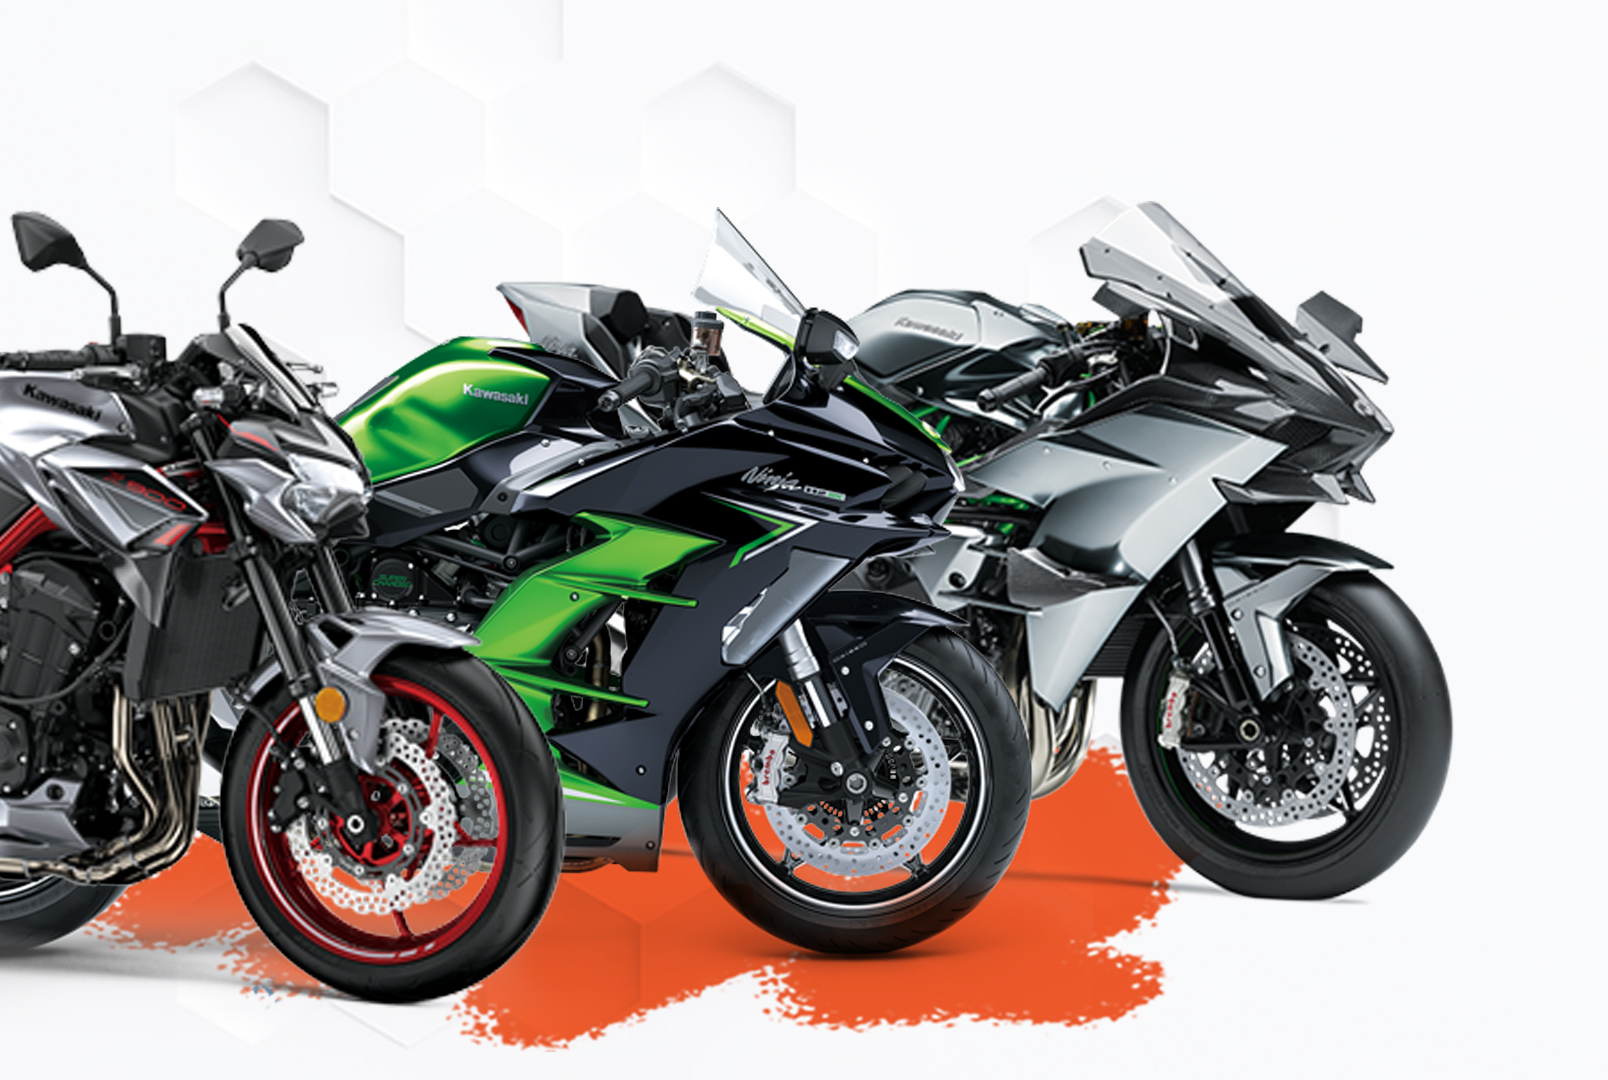 The 2023 Kawasaki Motorcycle Lineup + Our Take on Each Model 